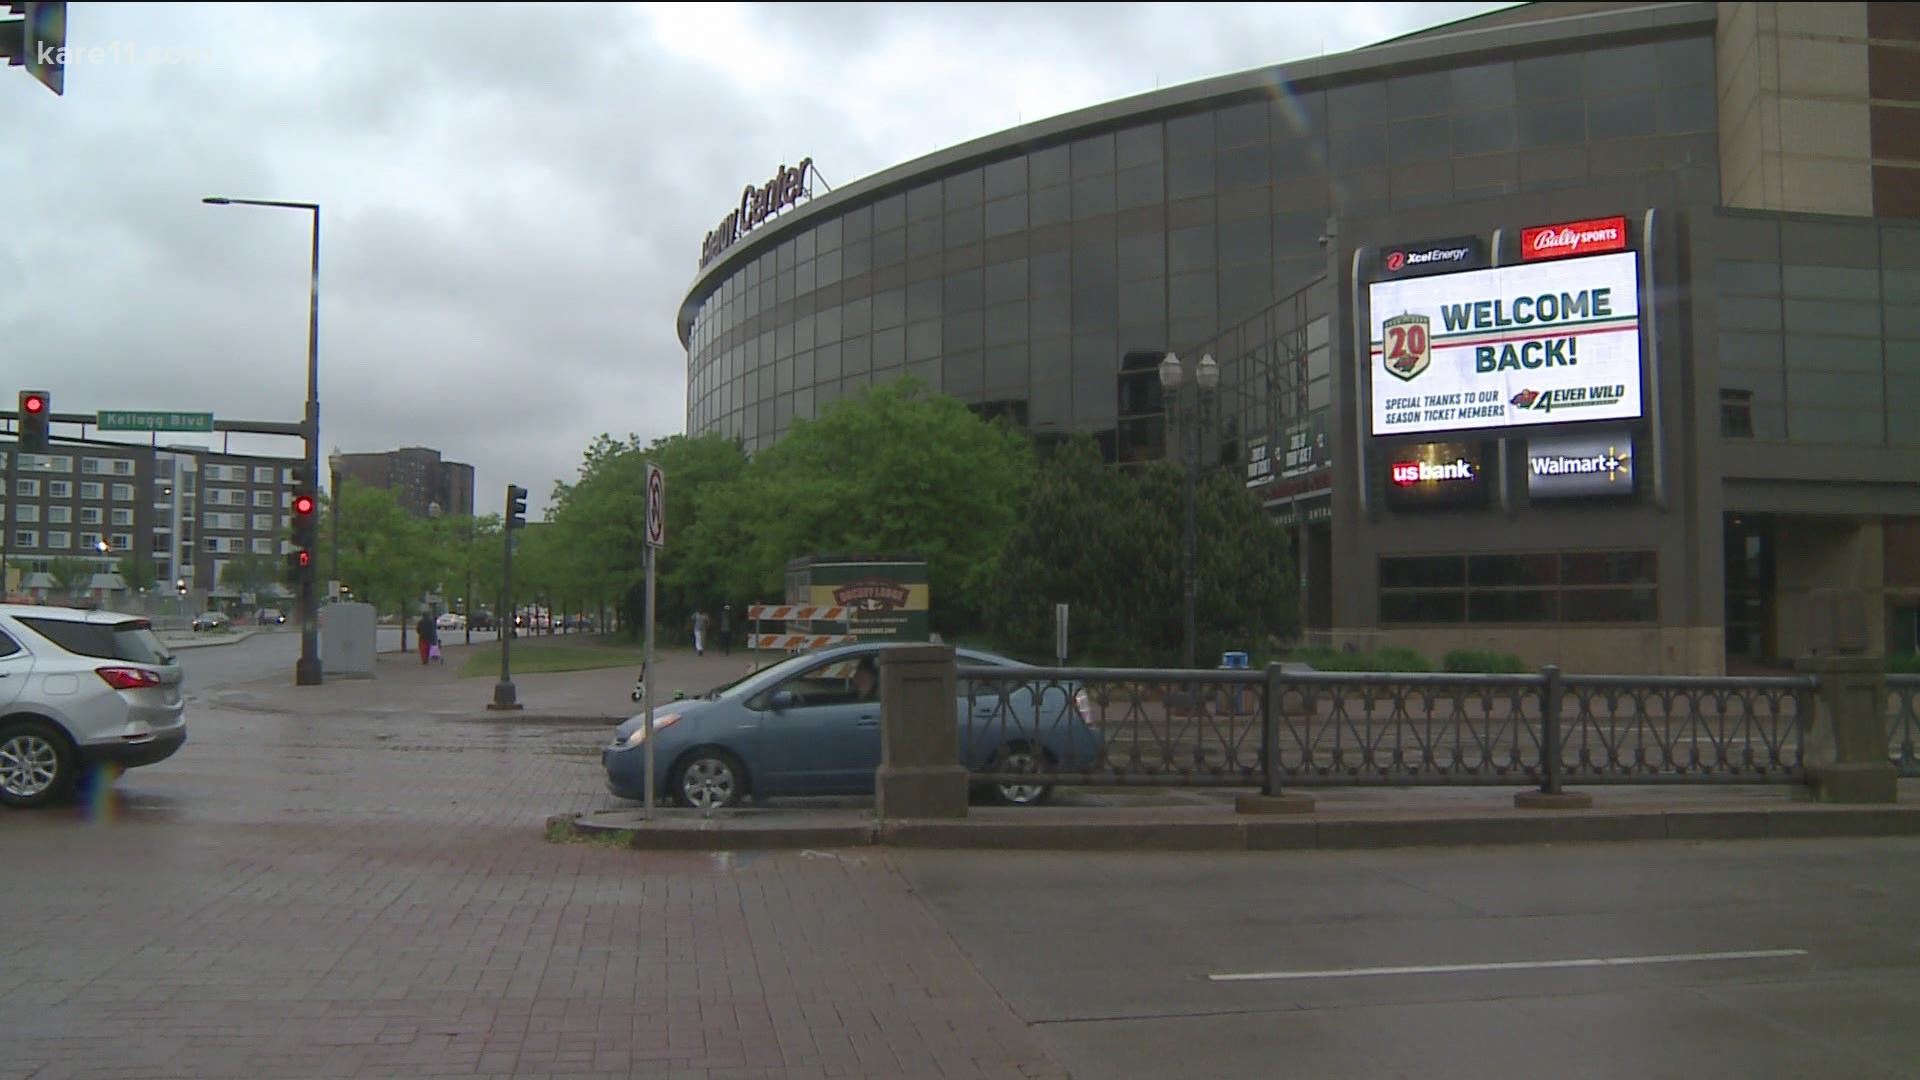 Team officials say about 4,500 people will be in attendance at Xcel Energy Center for Thursday night's game against the Vegas Golden Knights.